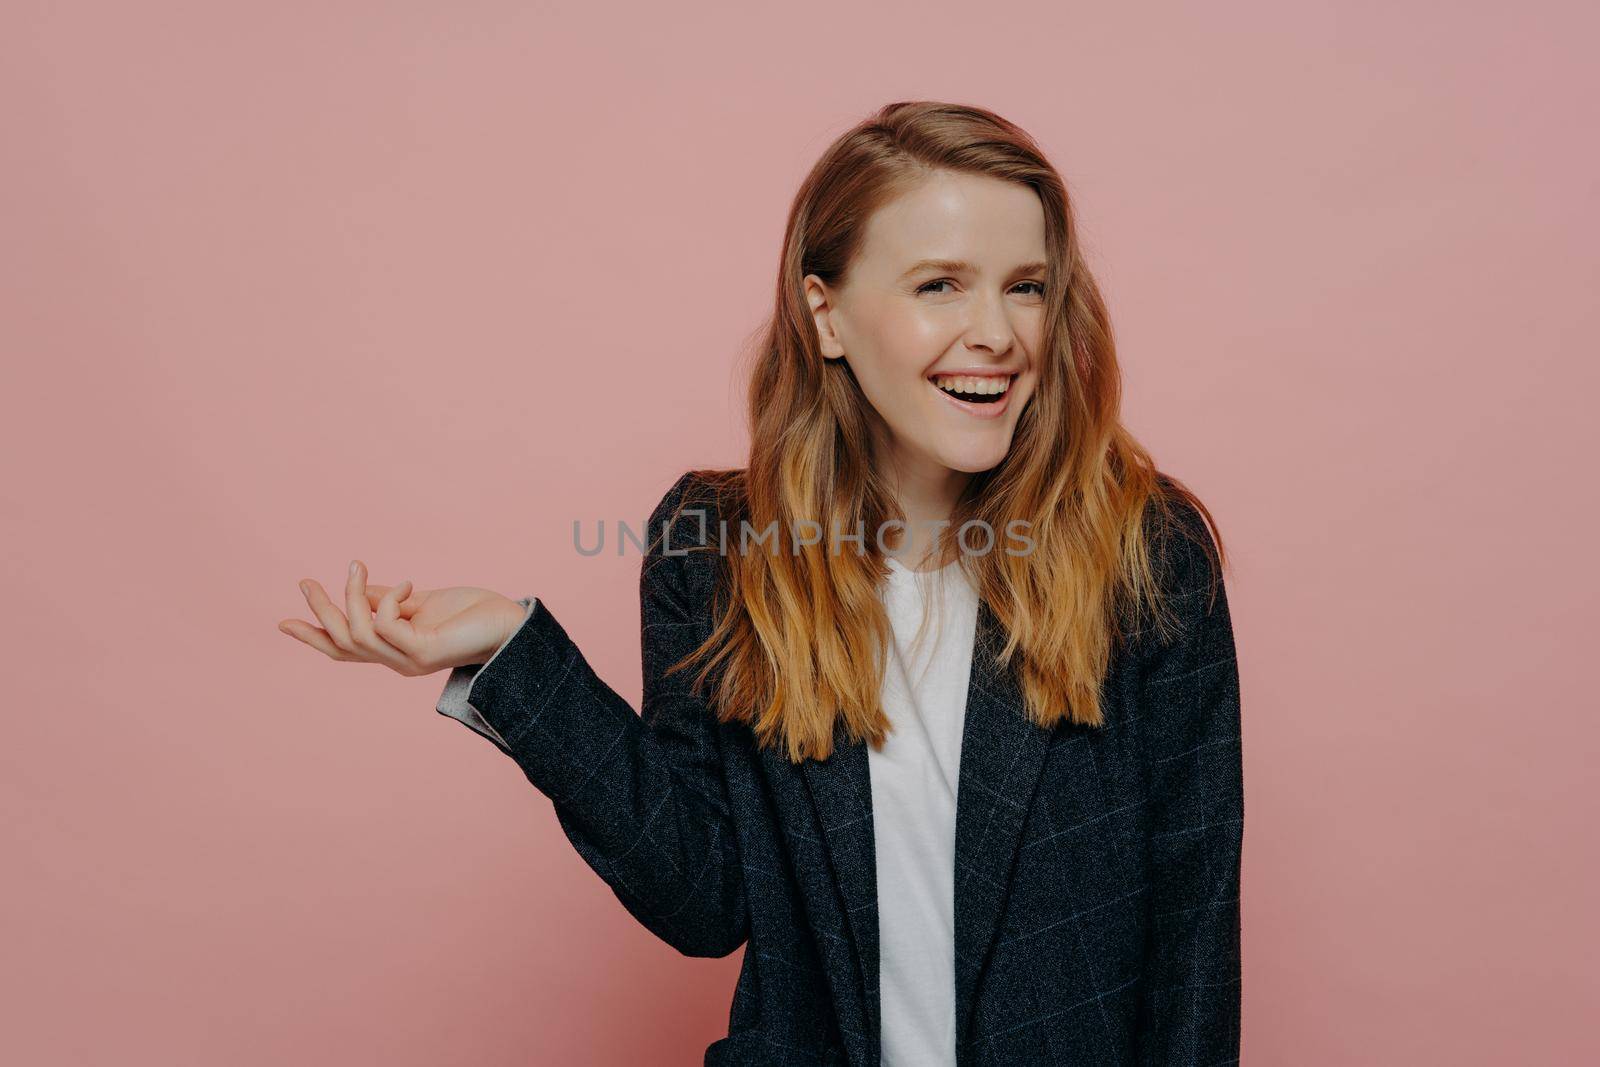 Excited young woman with tipping hand shrugging shoulders standing against light pink background in dark formal jacket, cute girl with wavy ginger medium length hair laughing